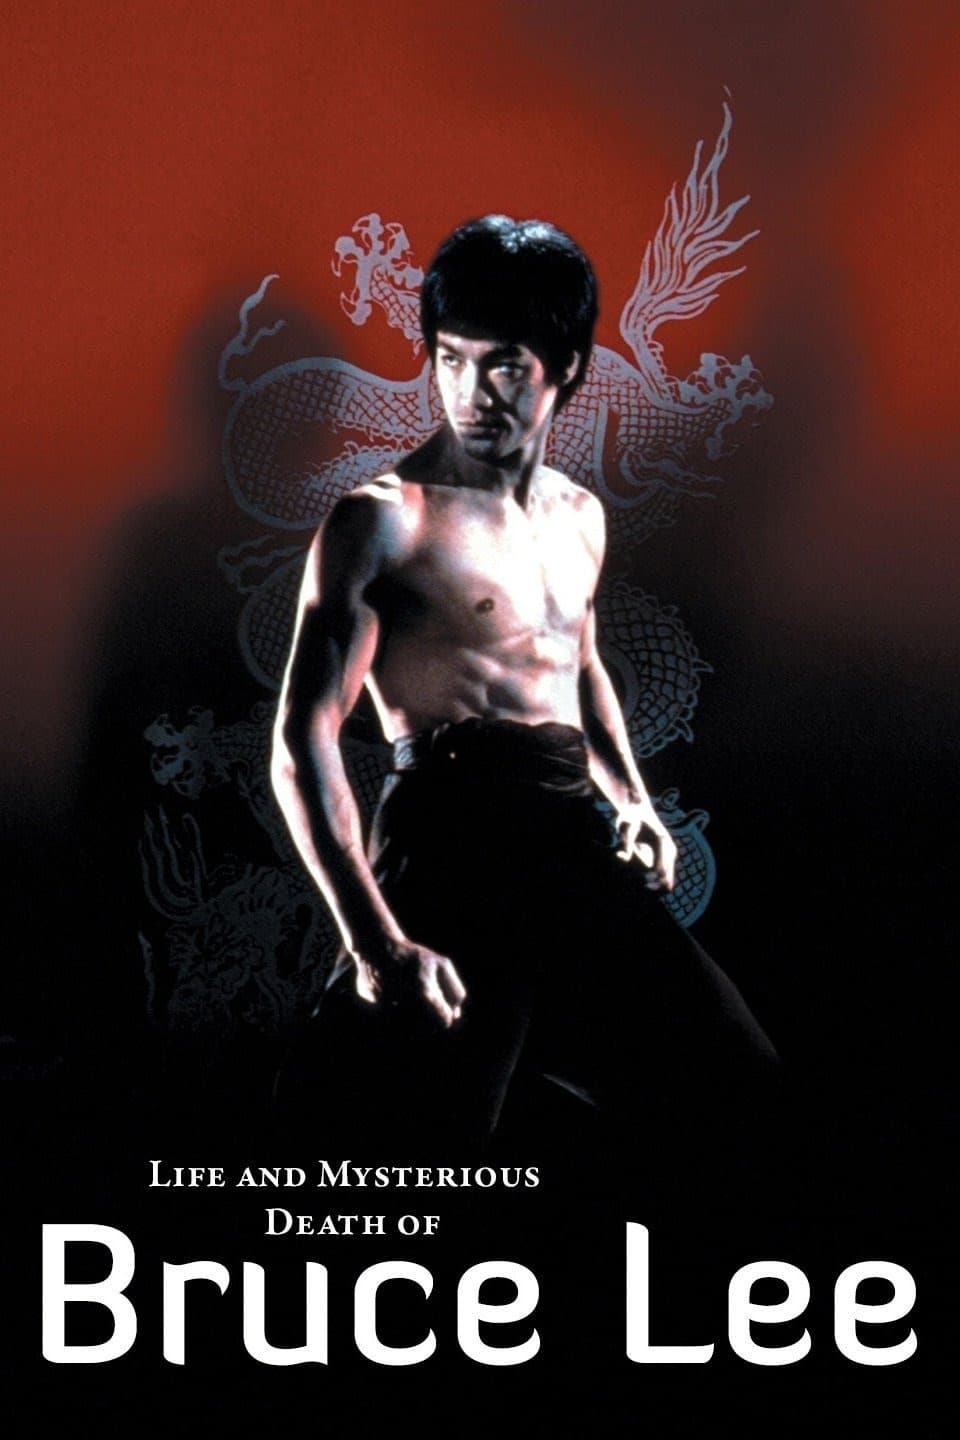 The Curse of the Dragon (1993)